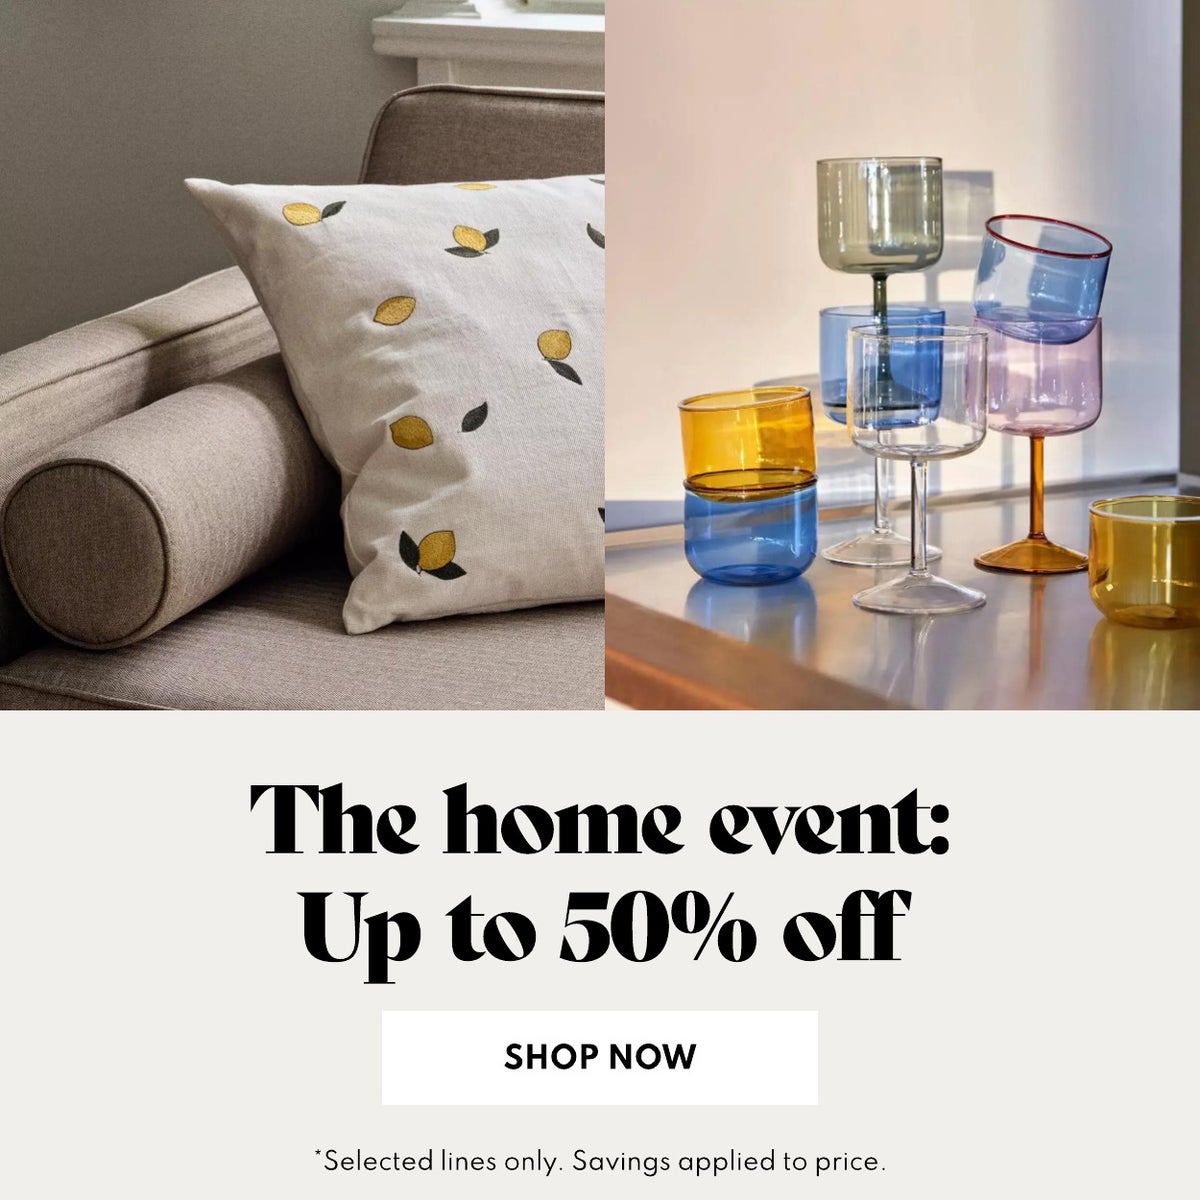 Home event: Up to 50% off